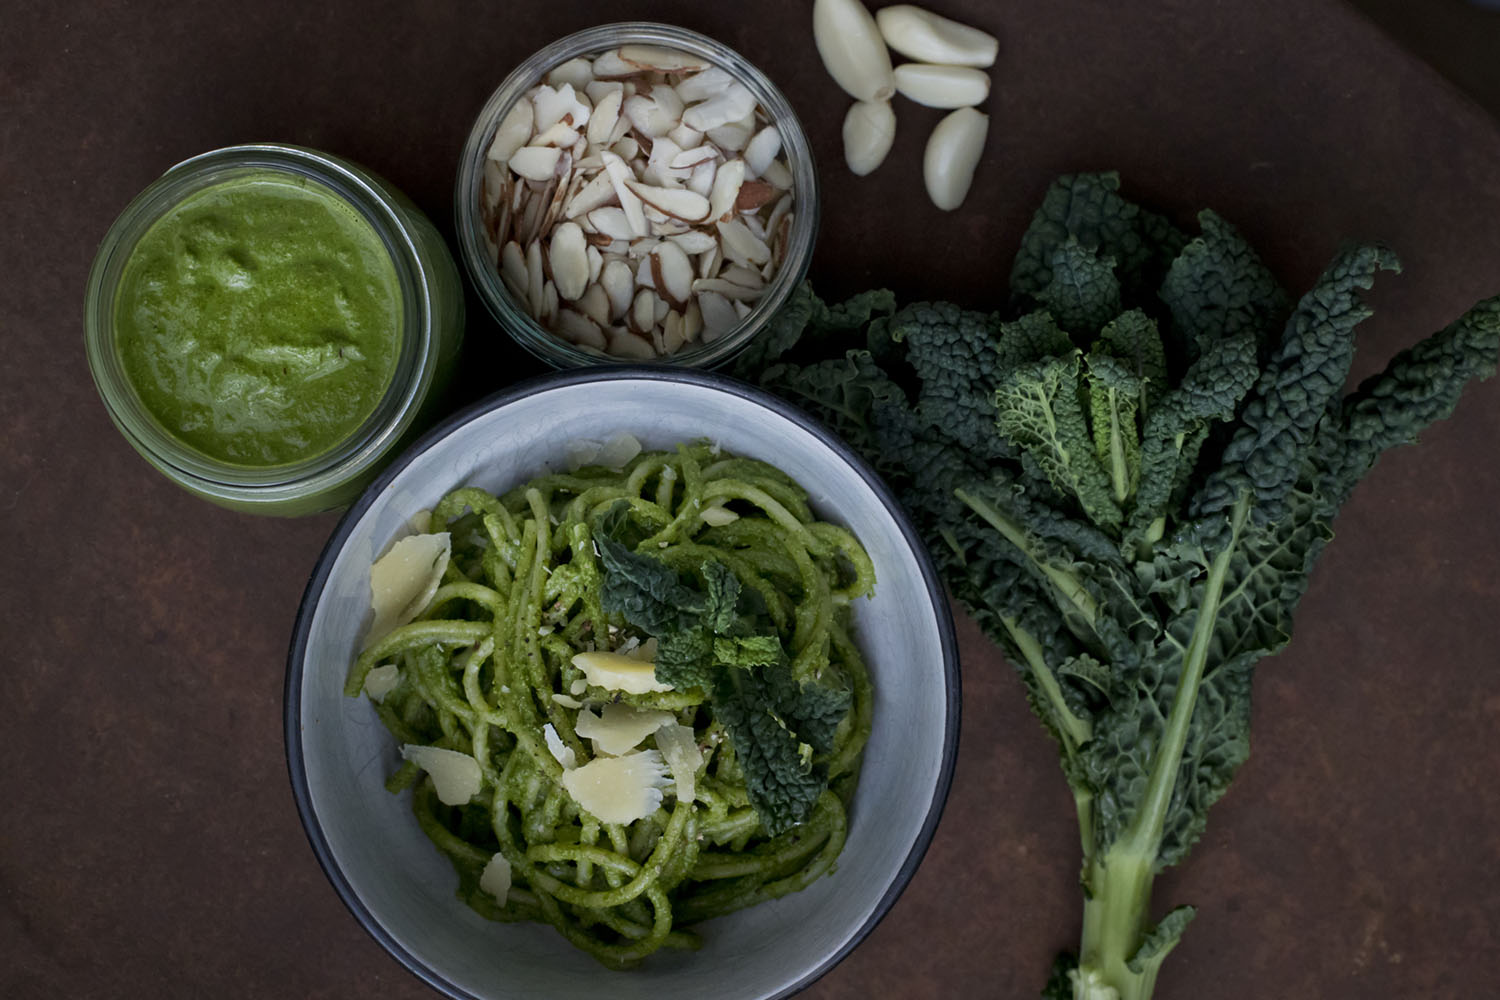 Etta Images Food Photography Christchurch Ōtautahi - Spinach made into Pesto, with Spaghetti